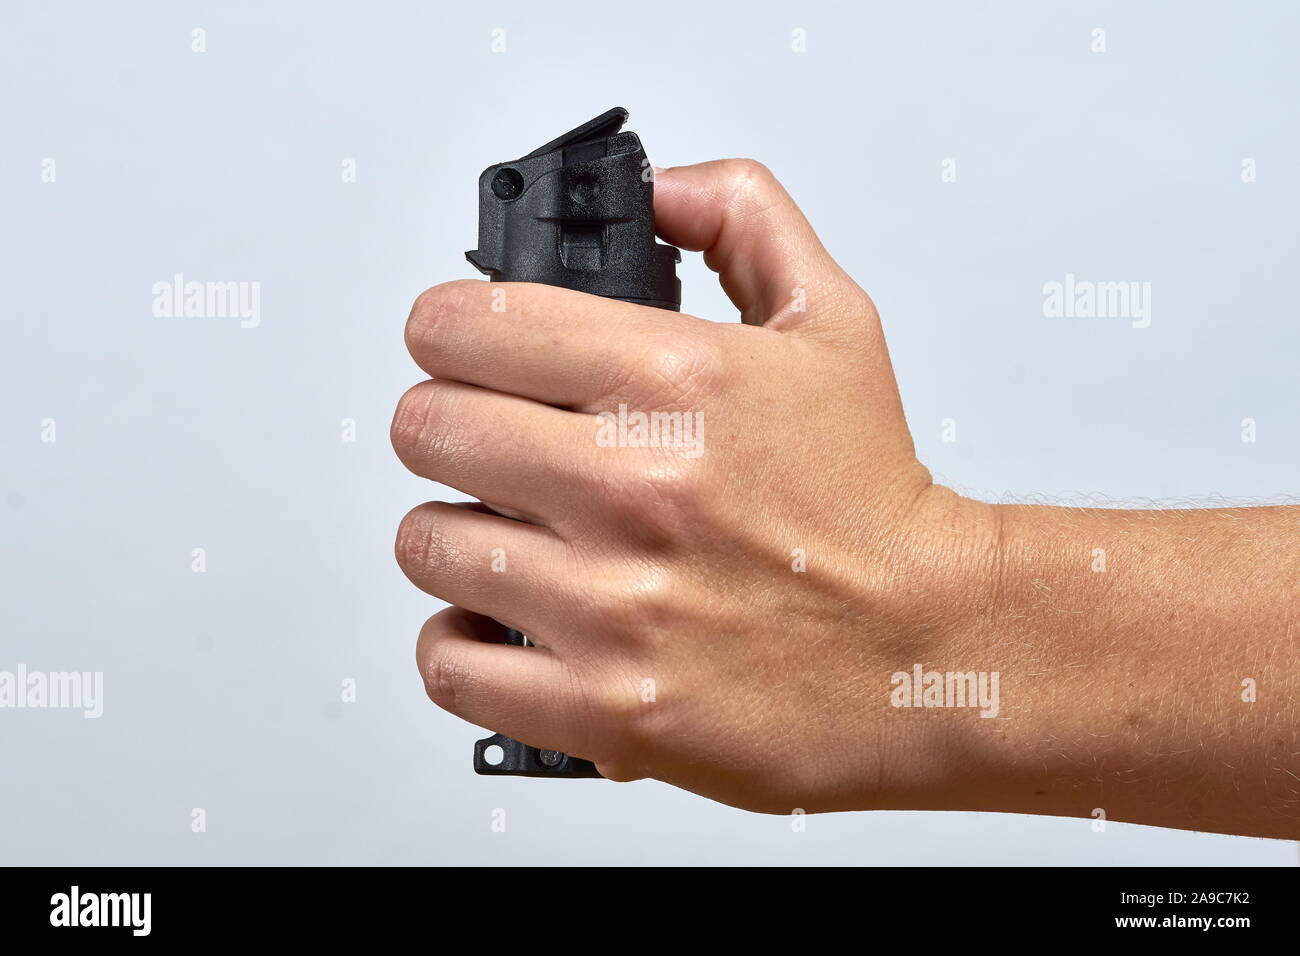 woman aiming pepper spray for defense Stock Photo